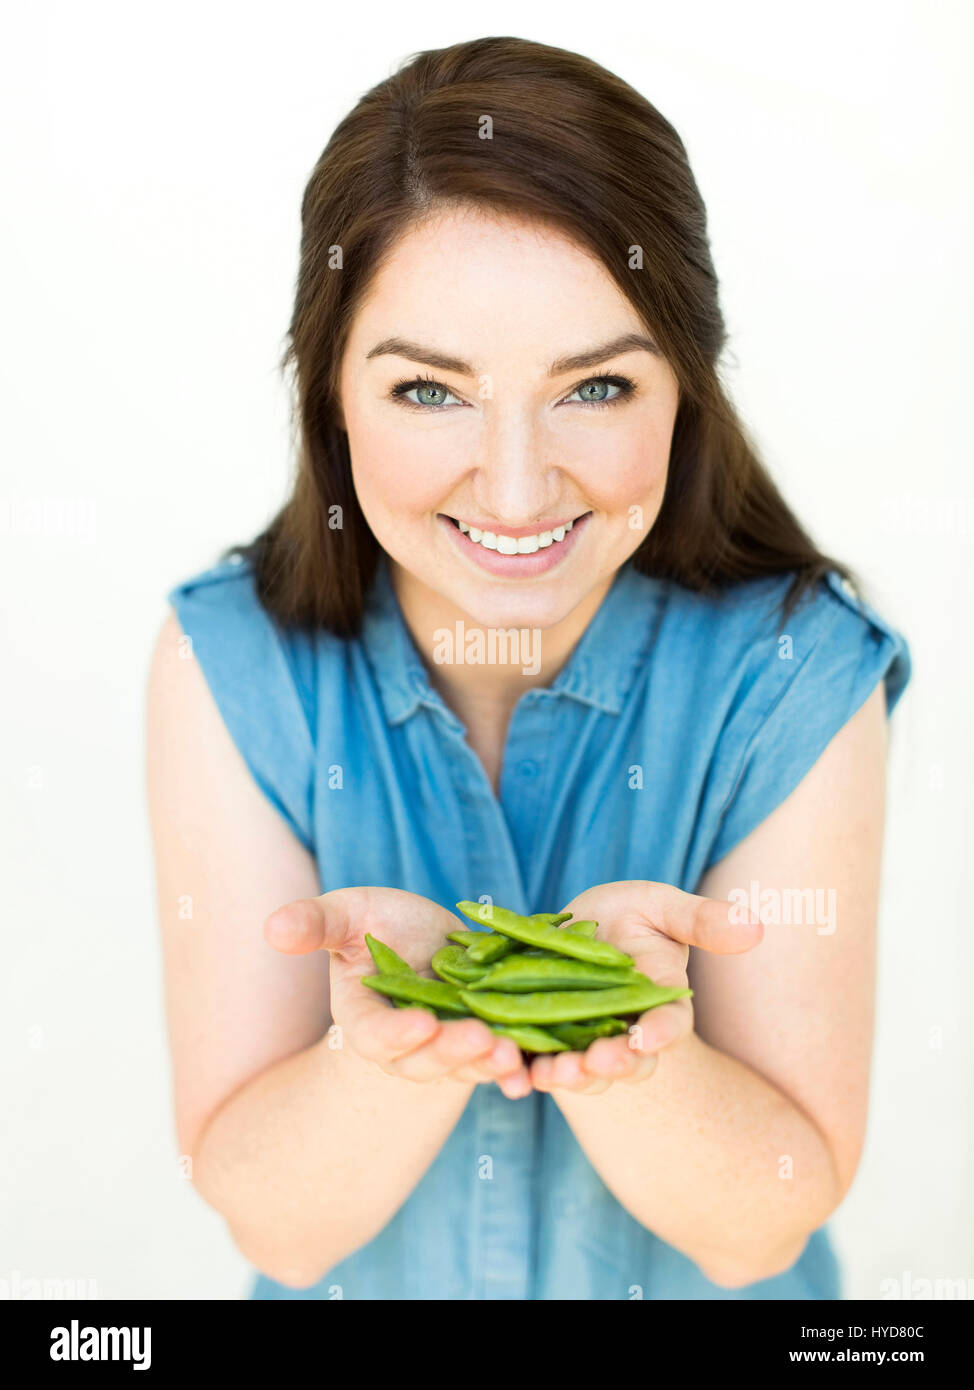 Woman wearing blue top holding sugar snap peas Stock Photo